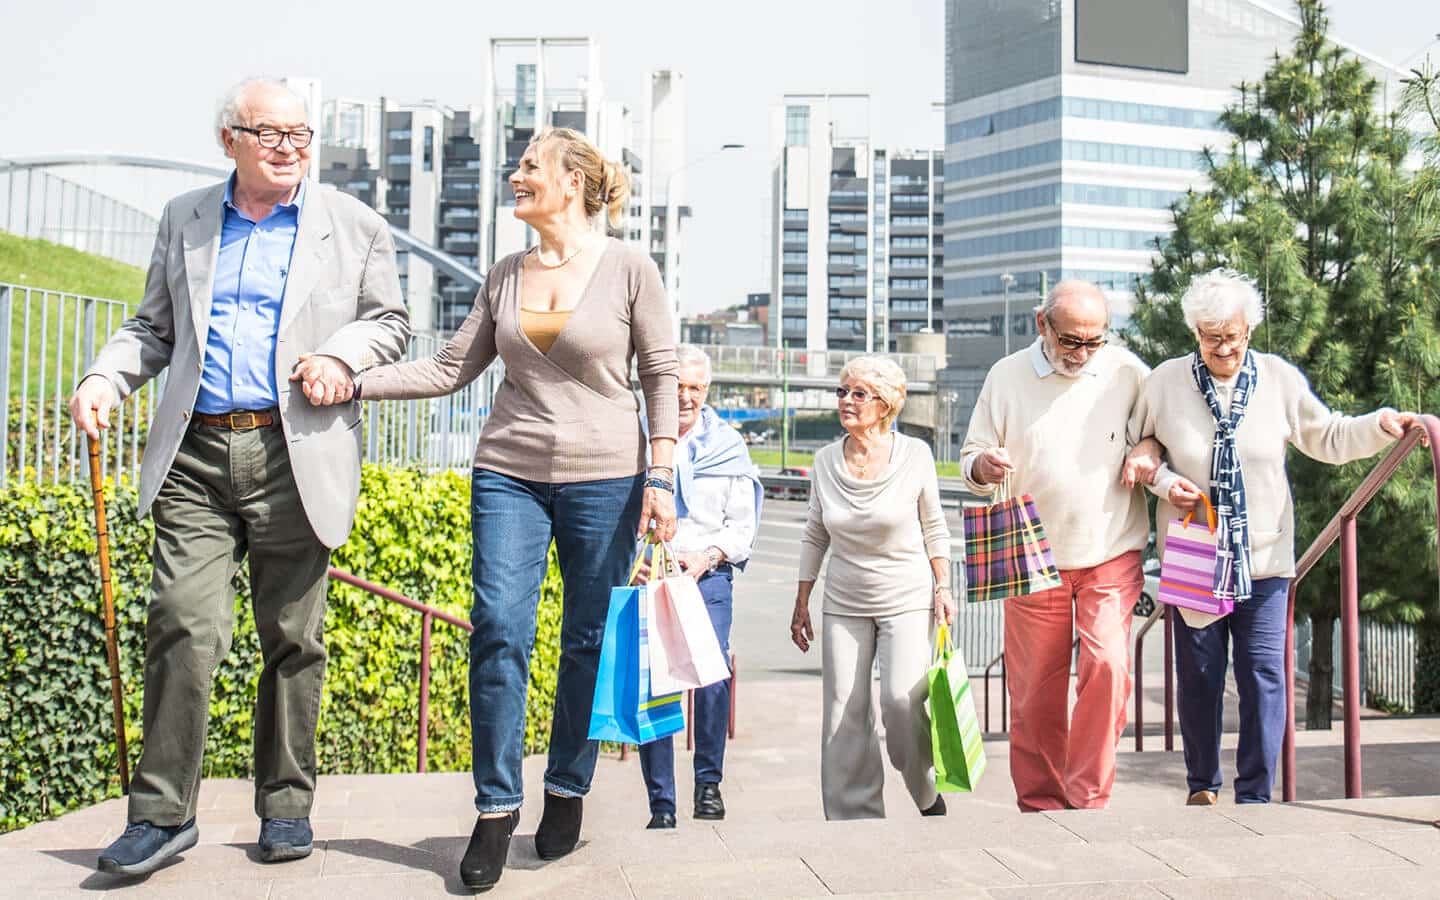 Groups of seniors walking with shopping bags in downtown city